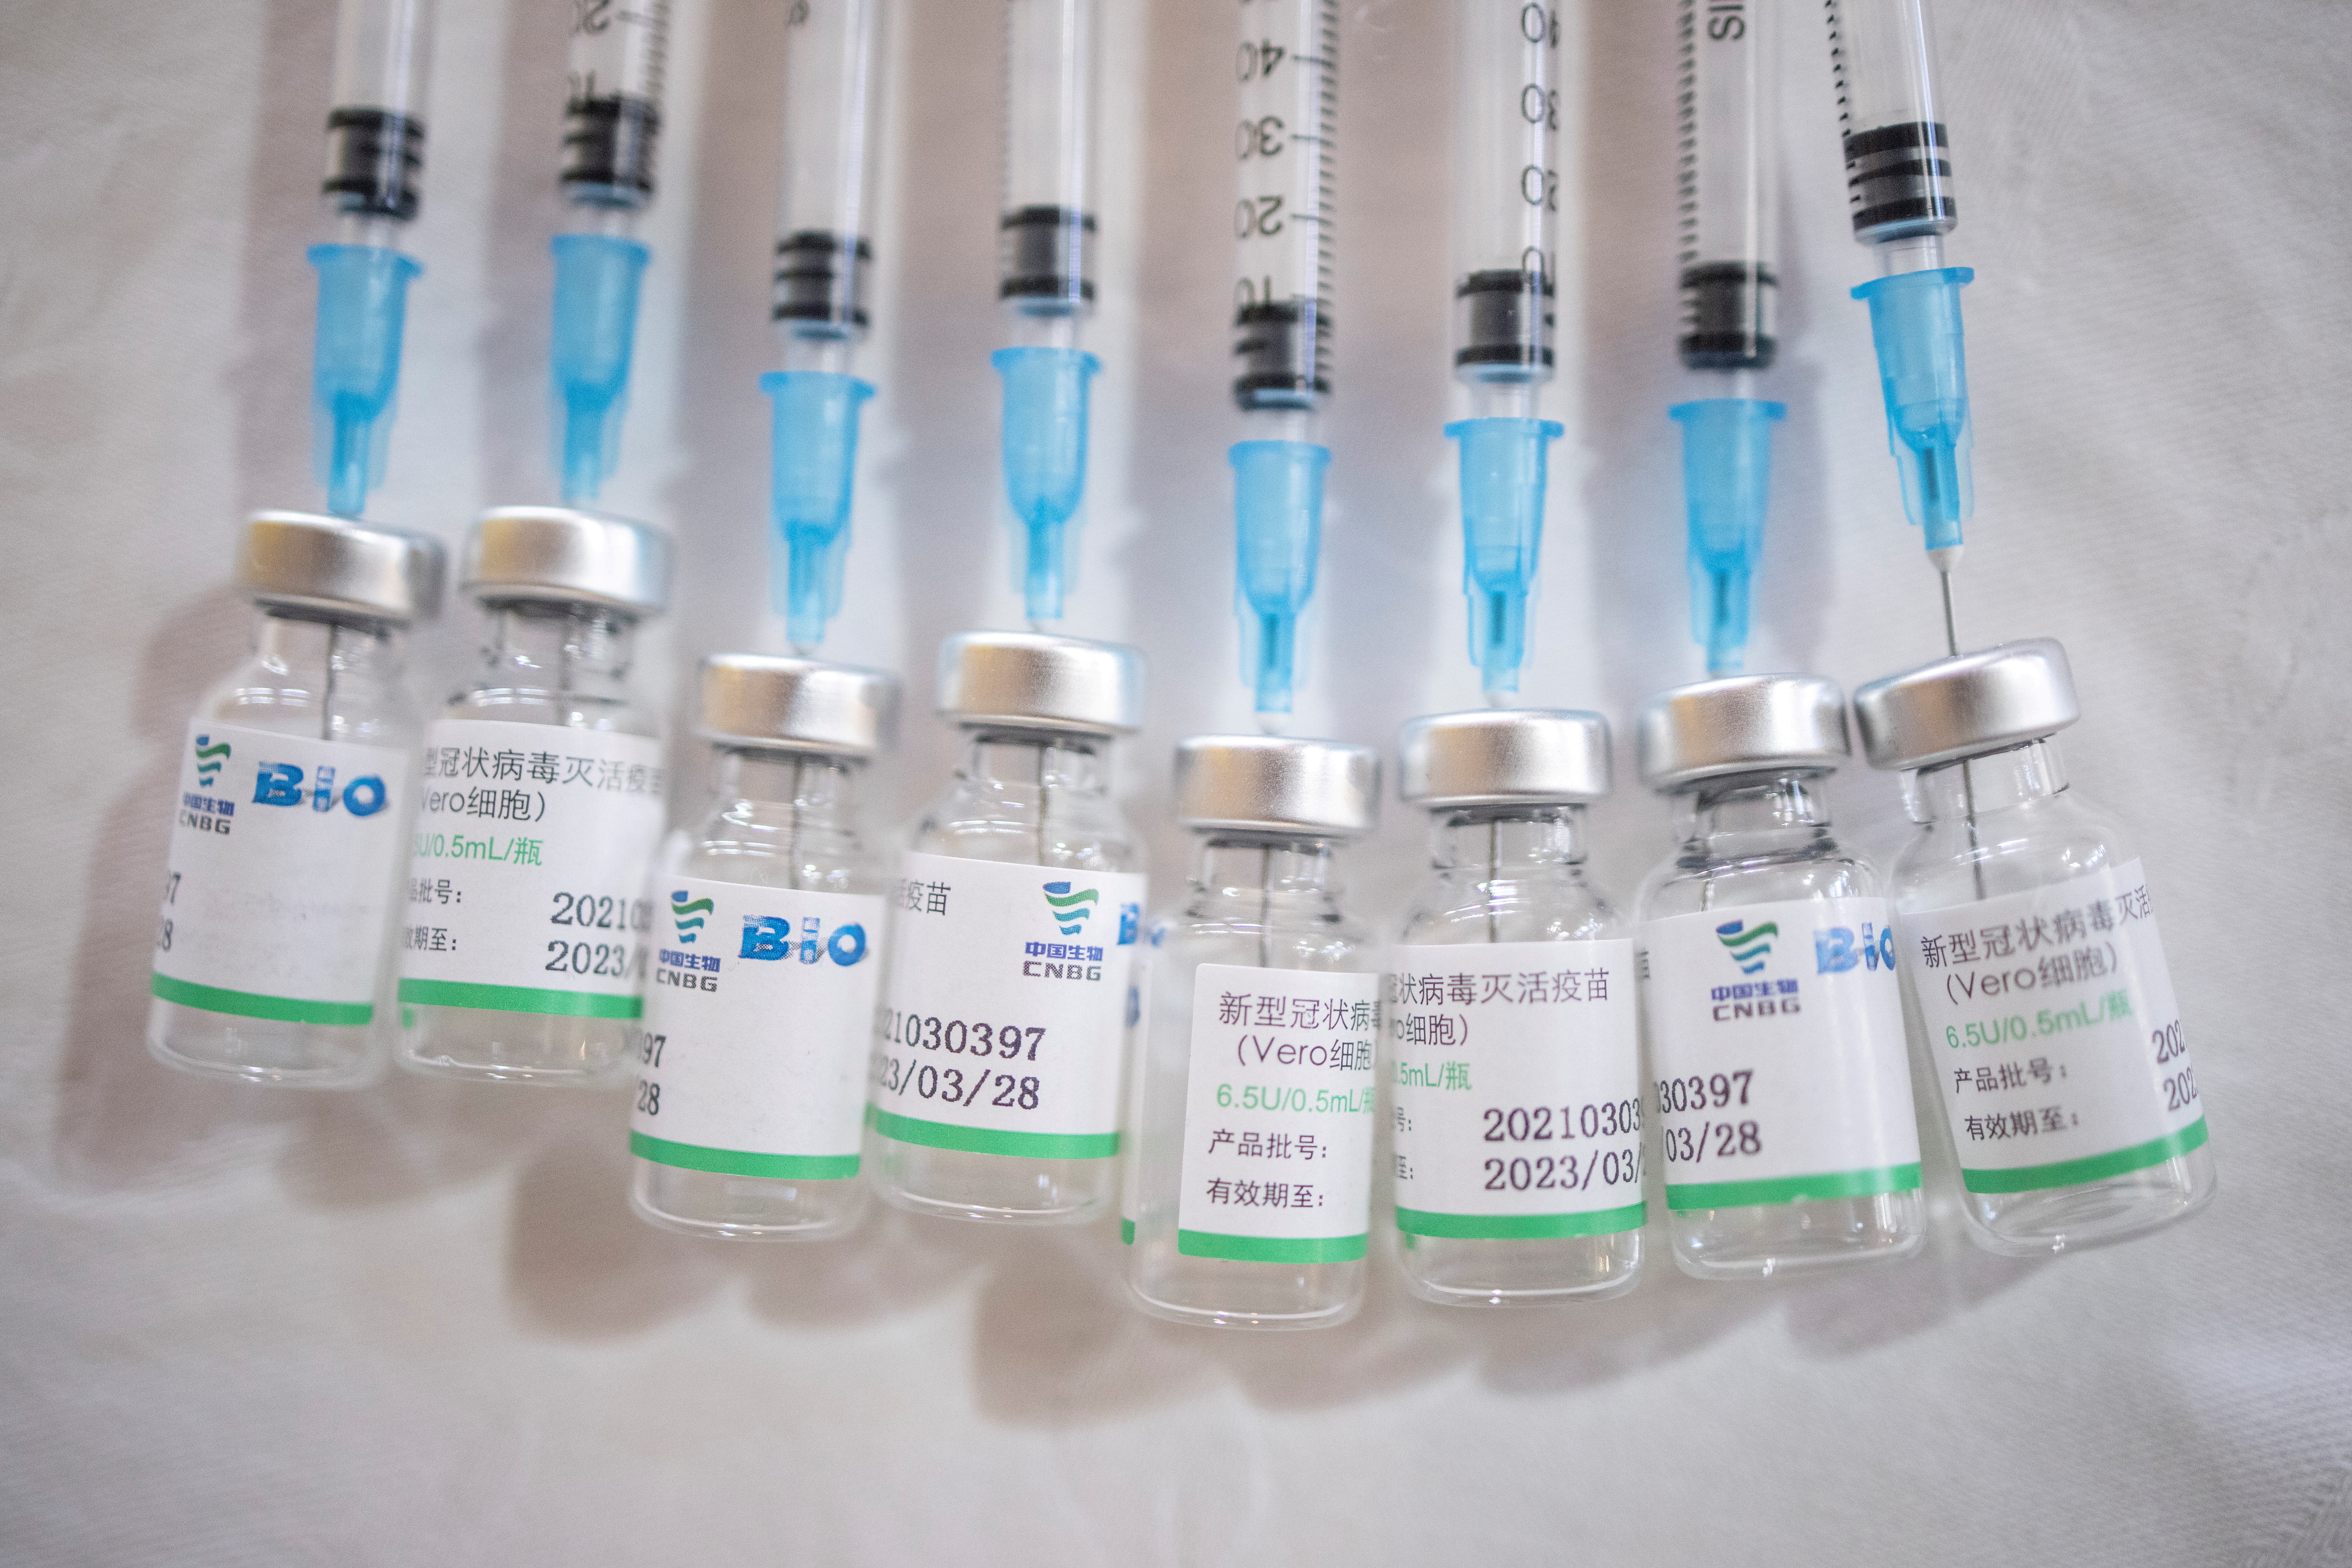 Doses of the Chinese Sinopharm vaccine against the coronavirus disease (COVID-19) are seen at the Biblioteka kod Milutina restaurant in Kragujevac, Serbia, May 4, 2021, in an offer to promote vaccination and contribute to the reopening of cafes, restaurants and bars. REUTERS/Marko Djurica/File Photo